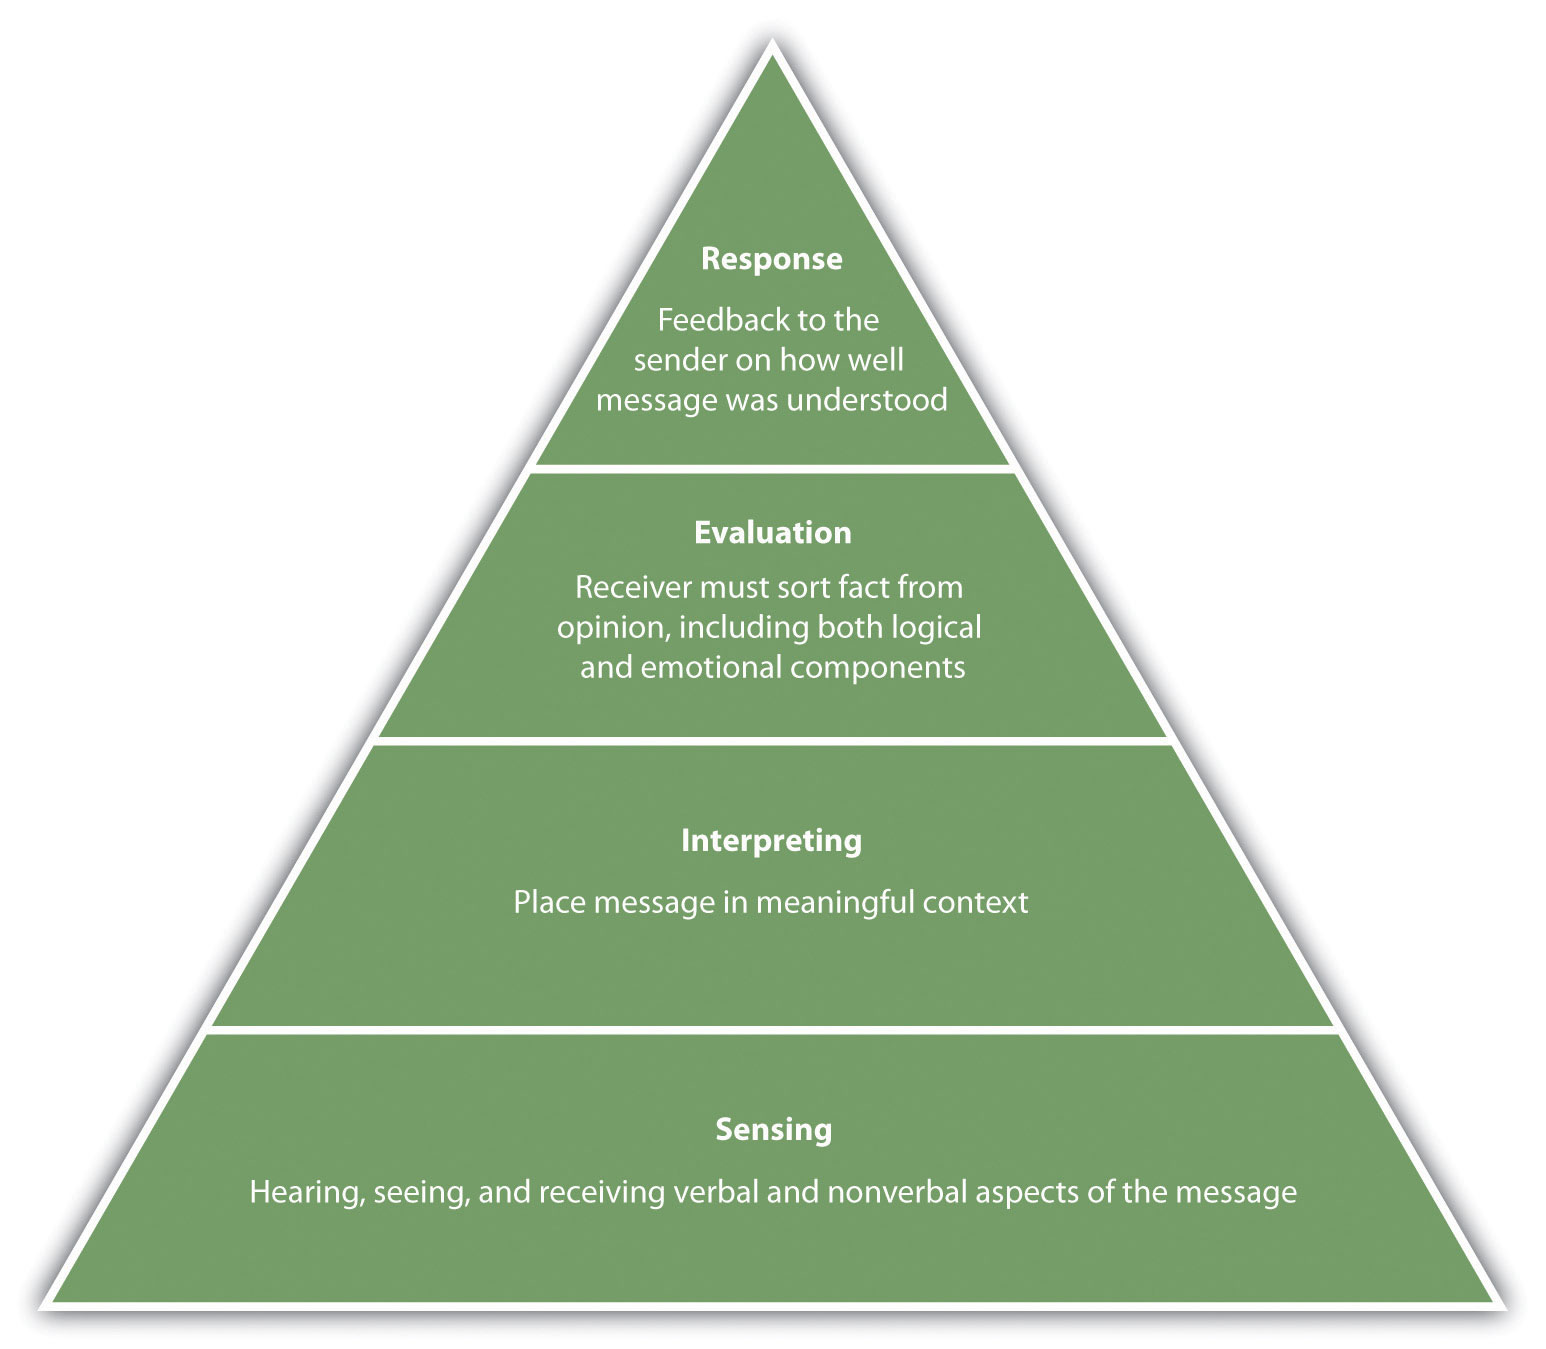 Active listening involves four phases: Response (Feedback to the sender on how well a message was understood); Evaluation (Receiver must sort fact from opinion, including both logical and emotional components); Interpreting (Place message in meaningful context); and Sensing (Hearing, seeing, and receiving verbal and nonverbal aspects of the message)